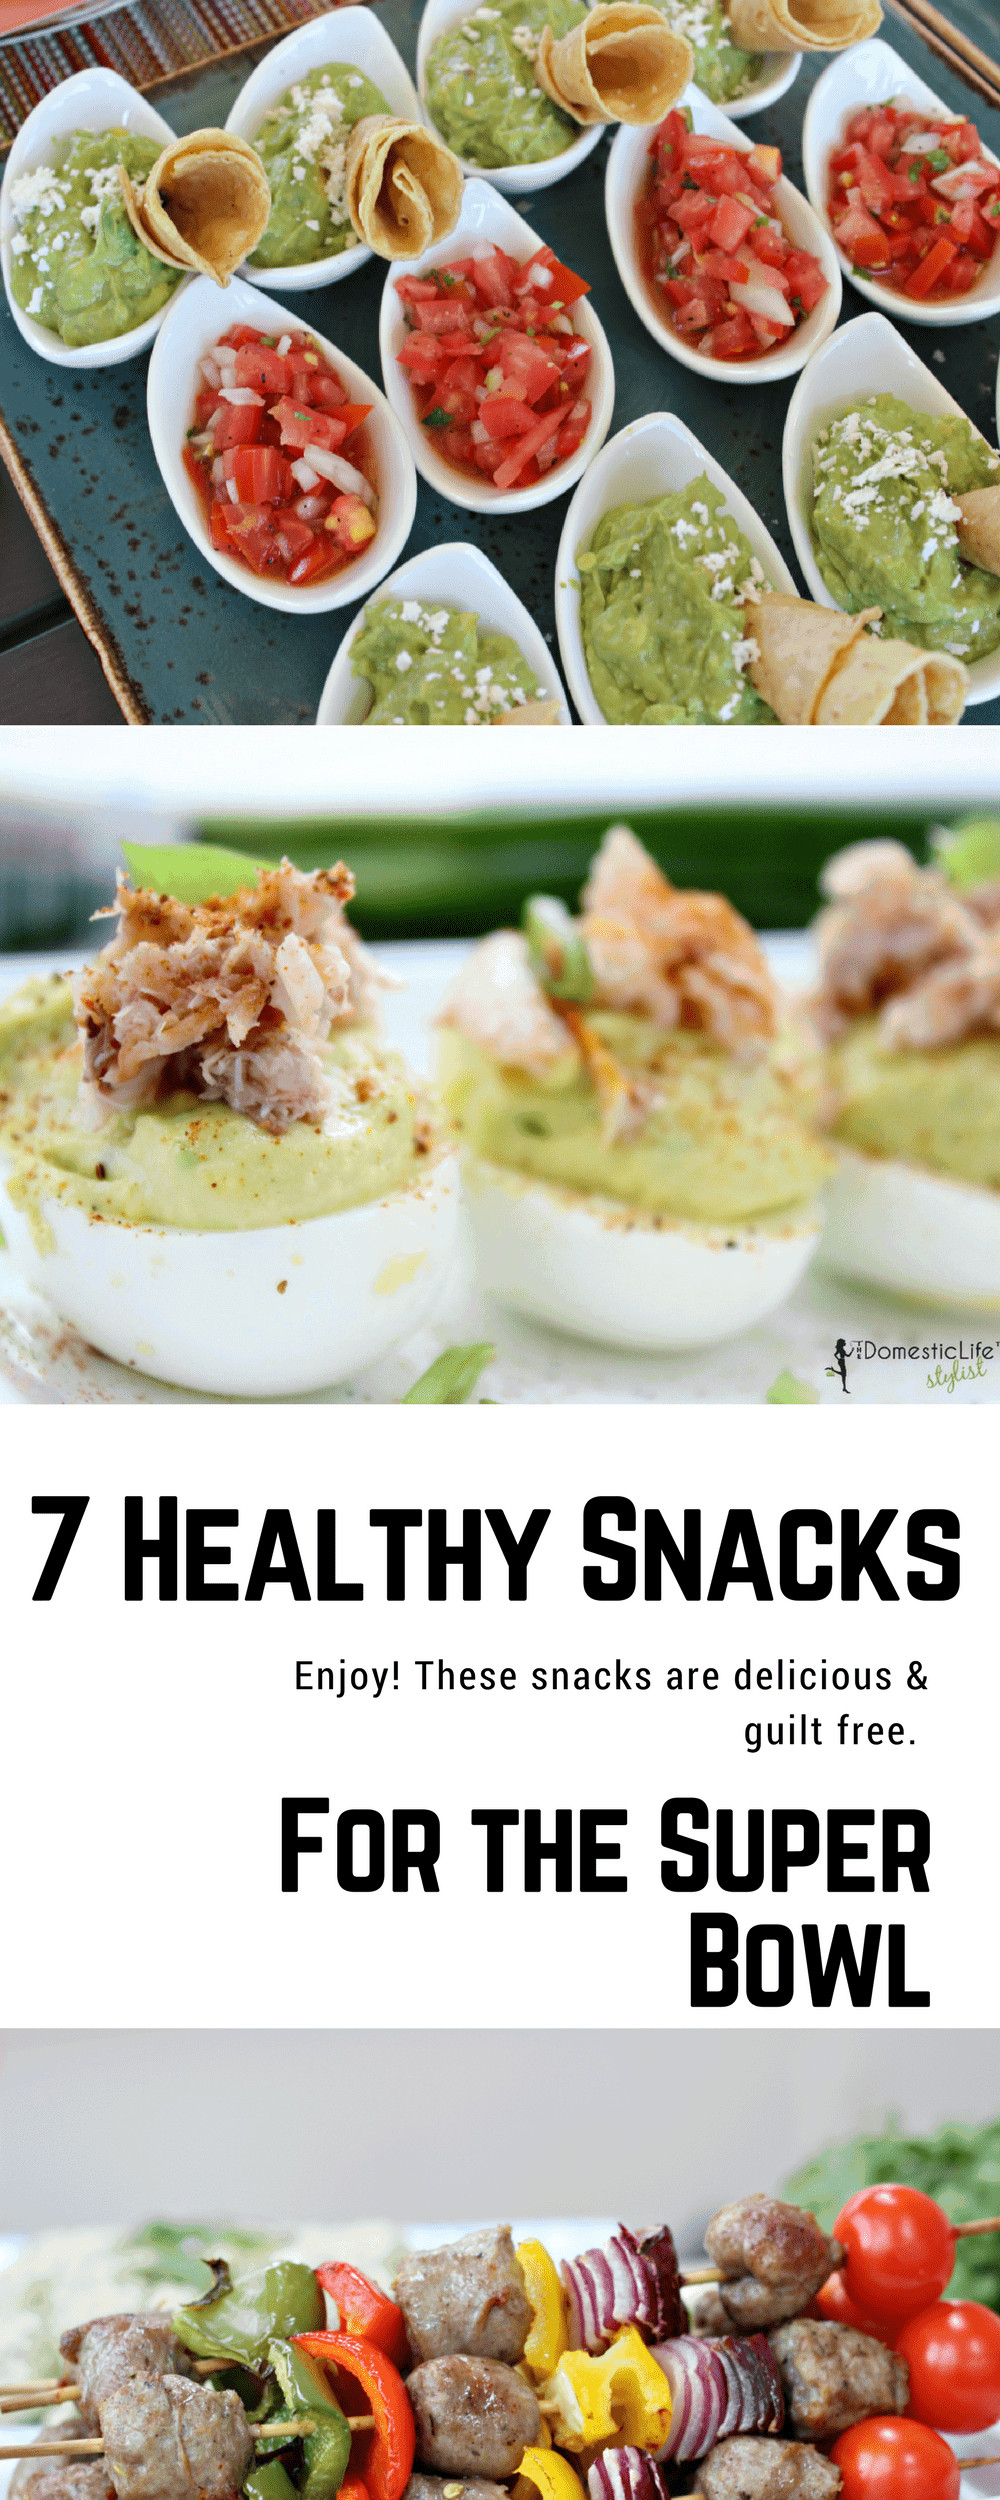 Healthy Super Bowl Snacks
 Healthy and Gluten Free Super Bowl Snacks